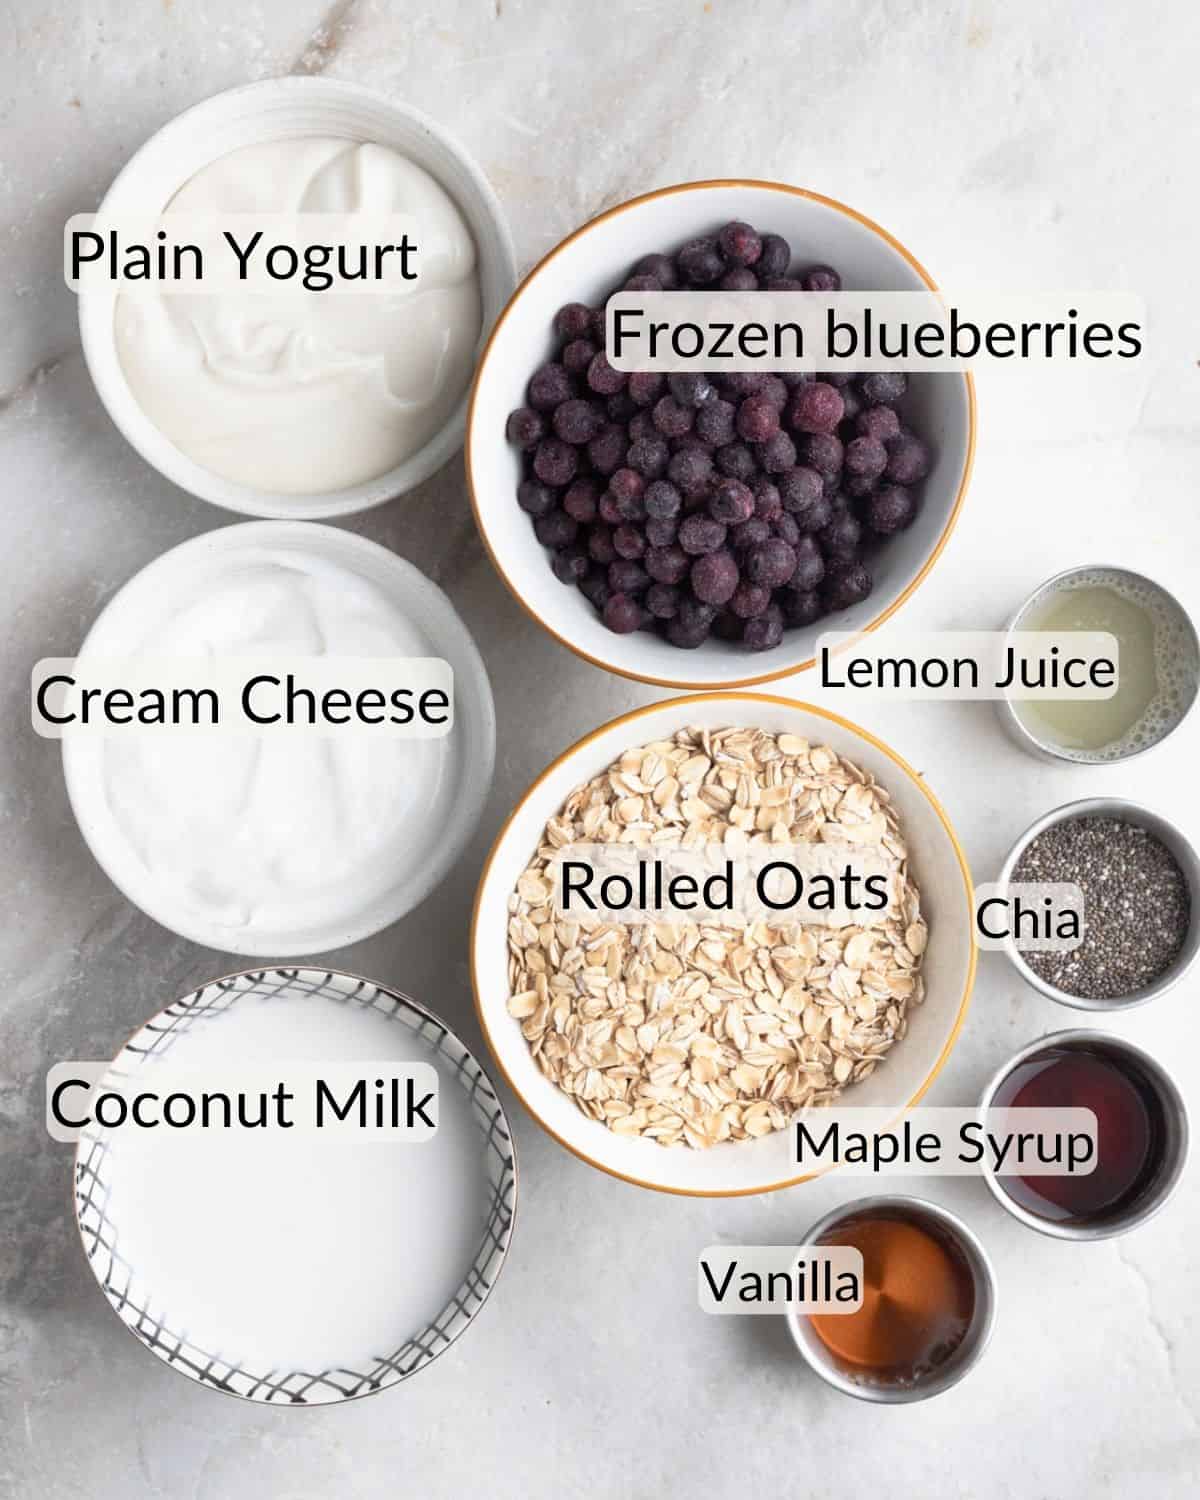 Ingredients for berry cheesecake overnight oats neatly arranged on a marble surface, including bowls of plain yogurt, frozen blueberries, cream cheese, rolled oats, chia seeds, coconut milk, maple syrup, lemon juice, and vanilla.